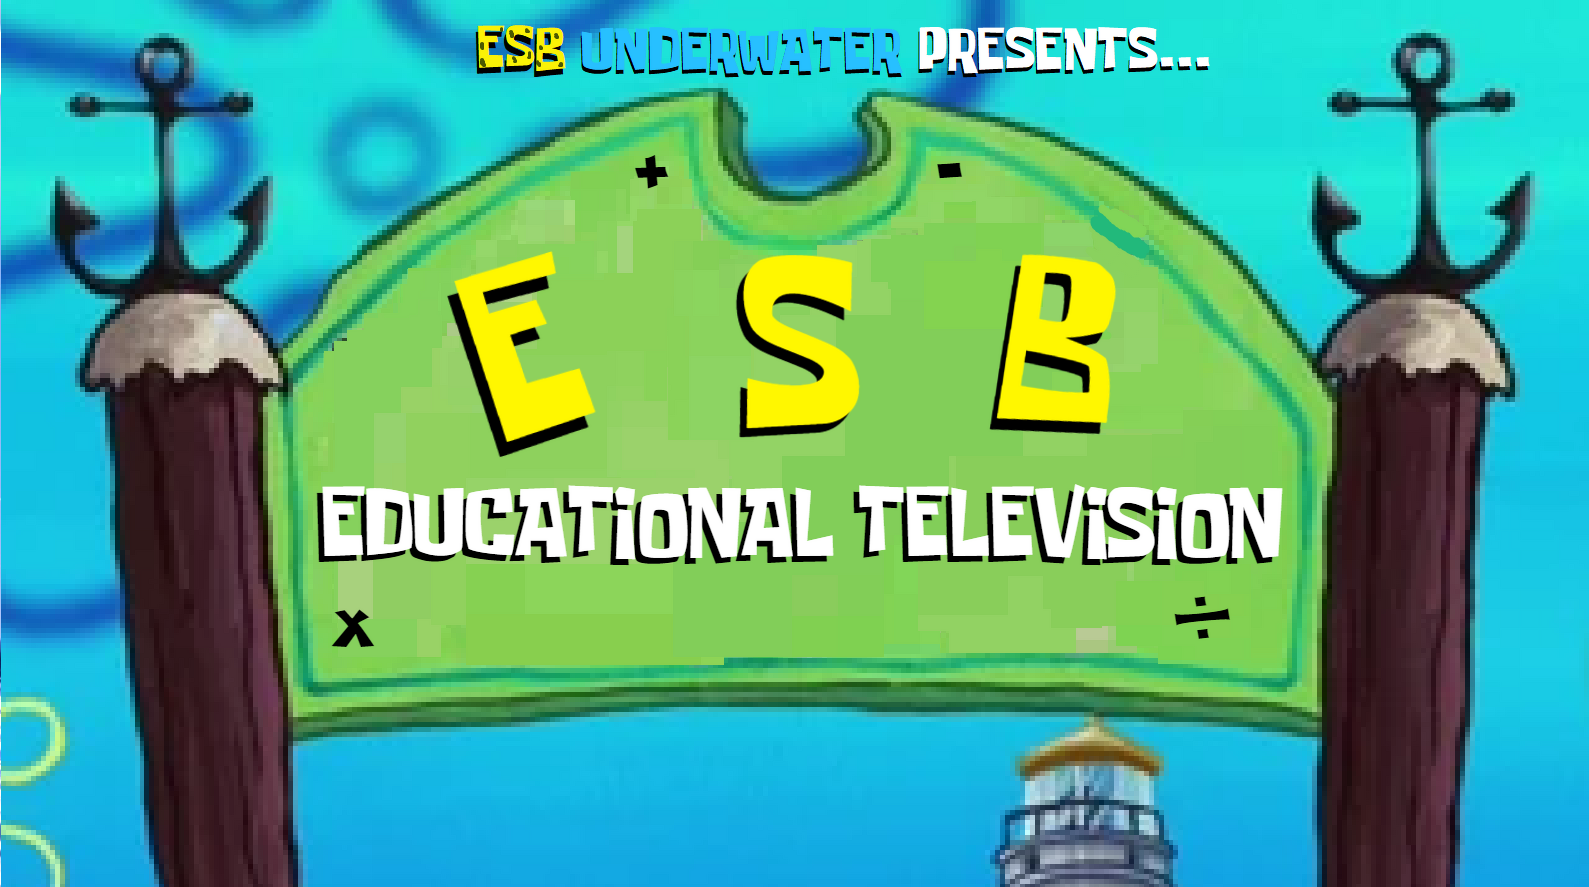 Cyberchase - Everybody deserves to be proud of who they